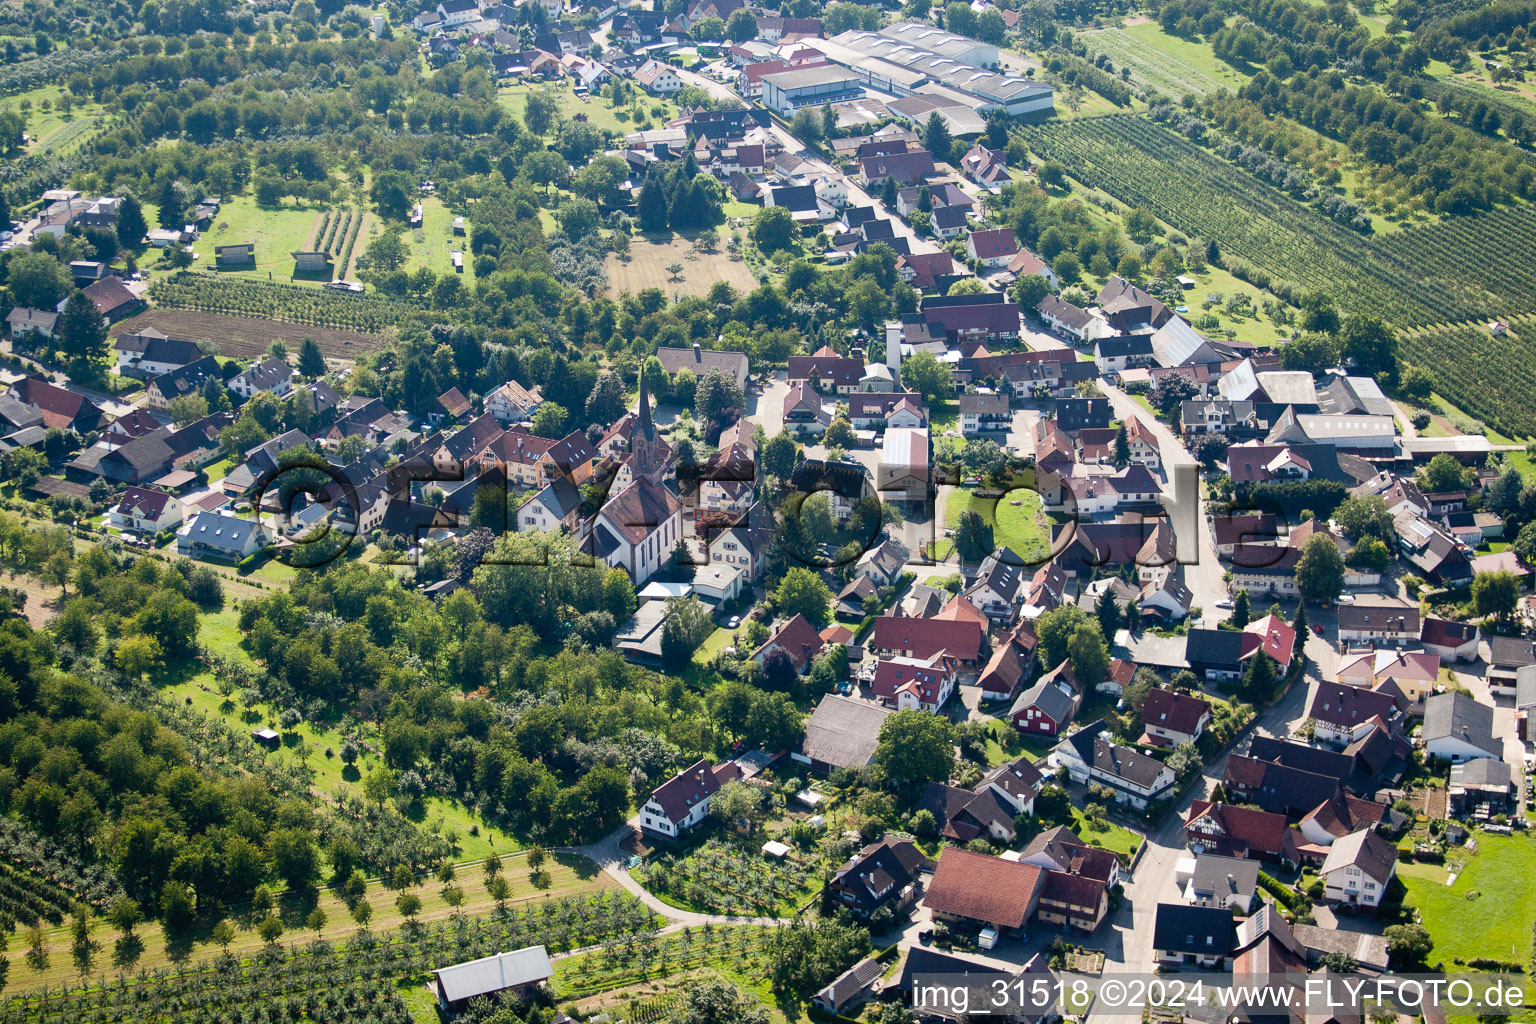 Town View of the streets and houses of the residential areas in the district Moesbach in Achern in the state Baden-Wurttemberg